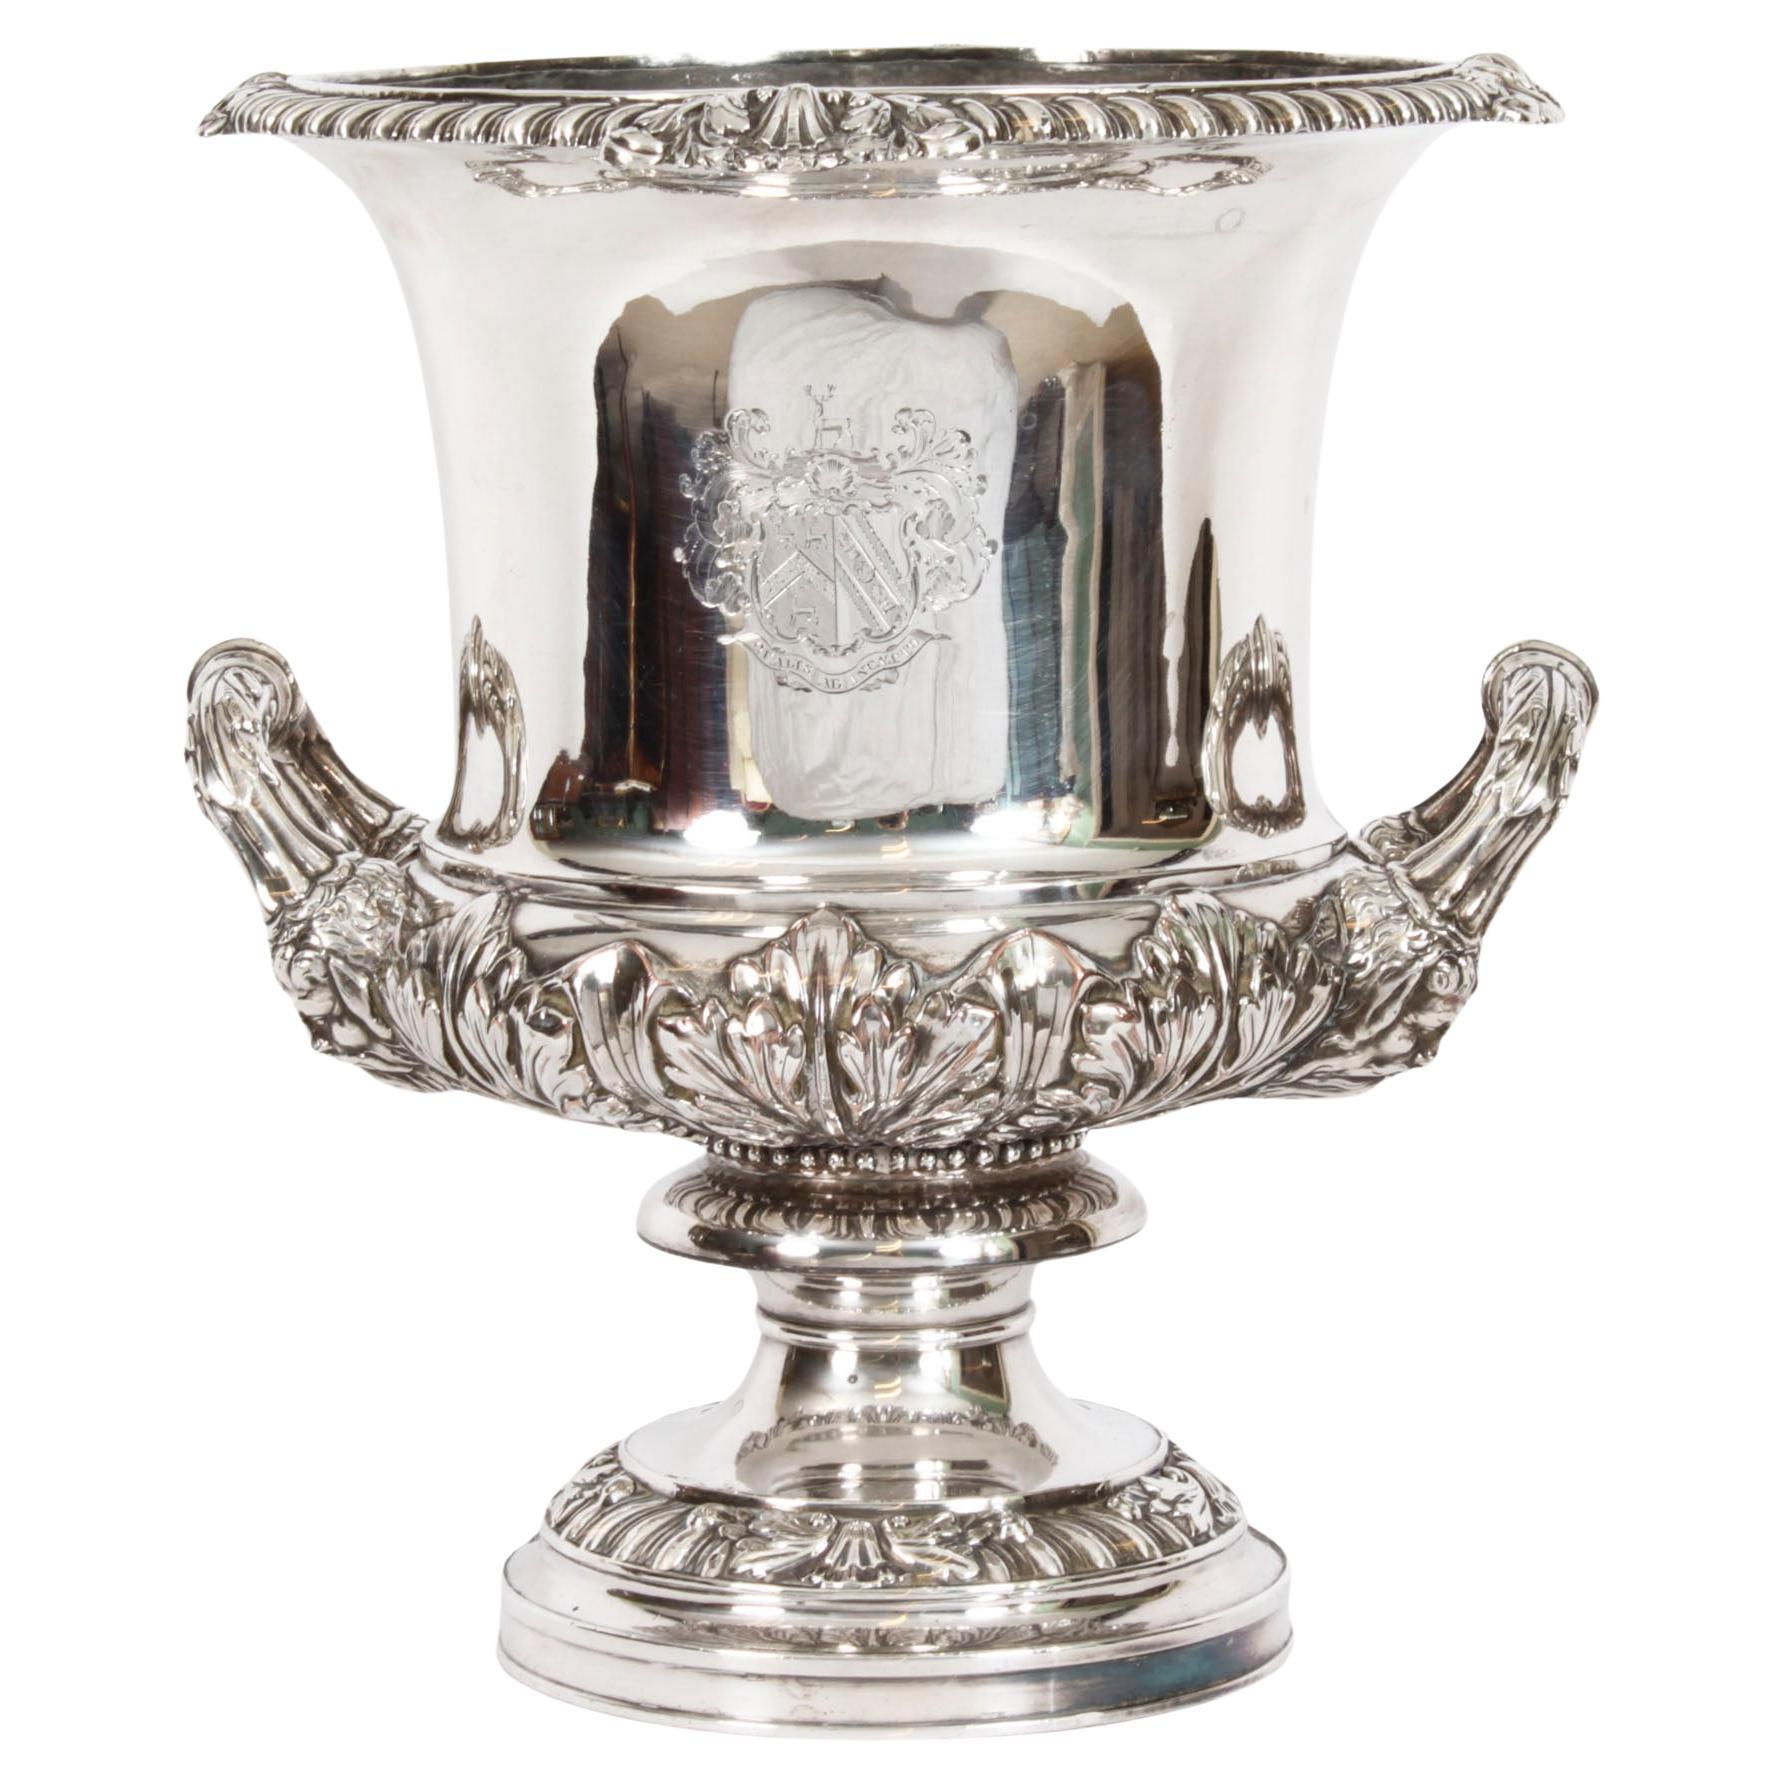 Matthew Boulton   Boulton was not a "goldsmith" or a "silversmith" in the accept For Sale